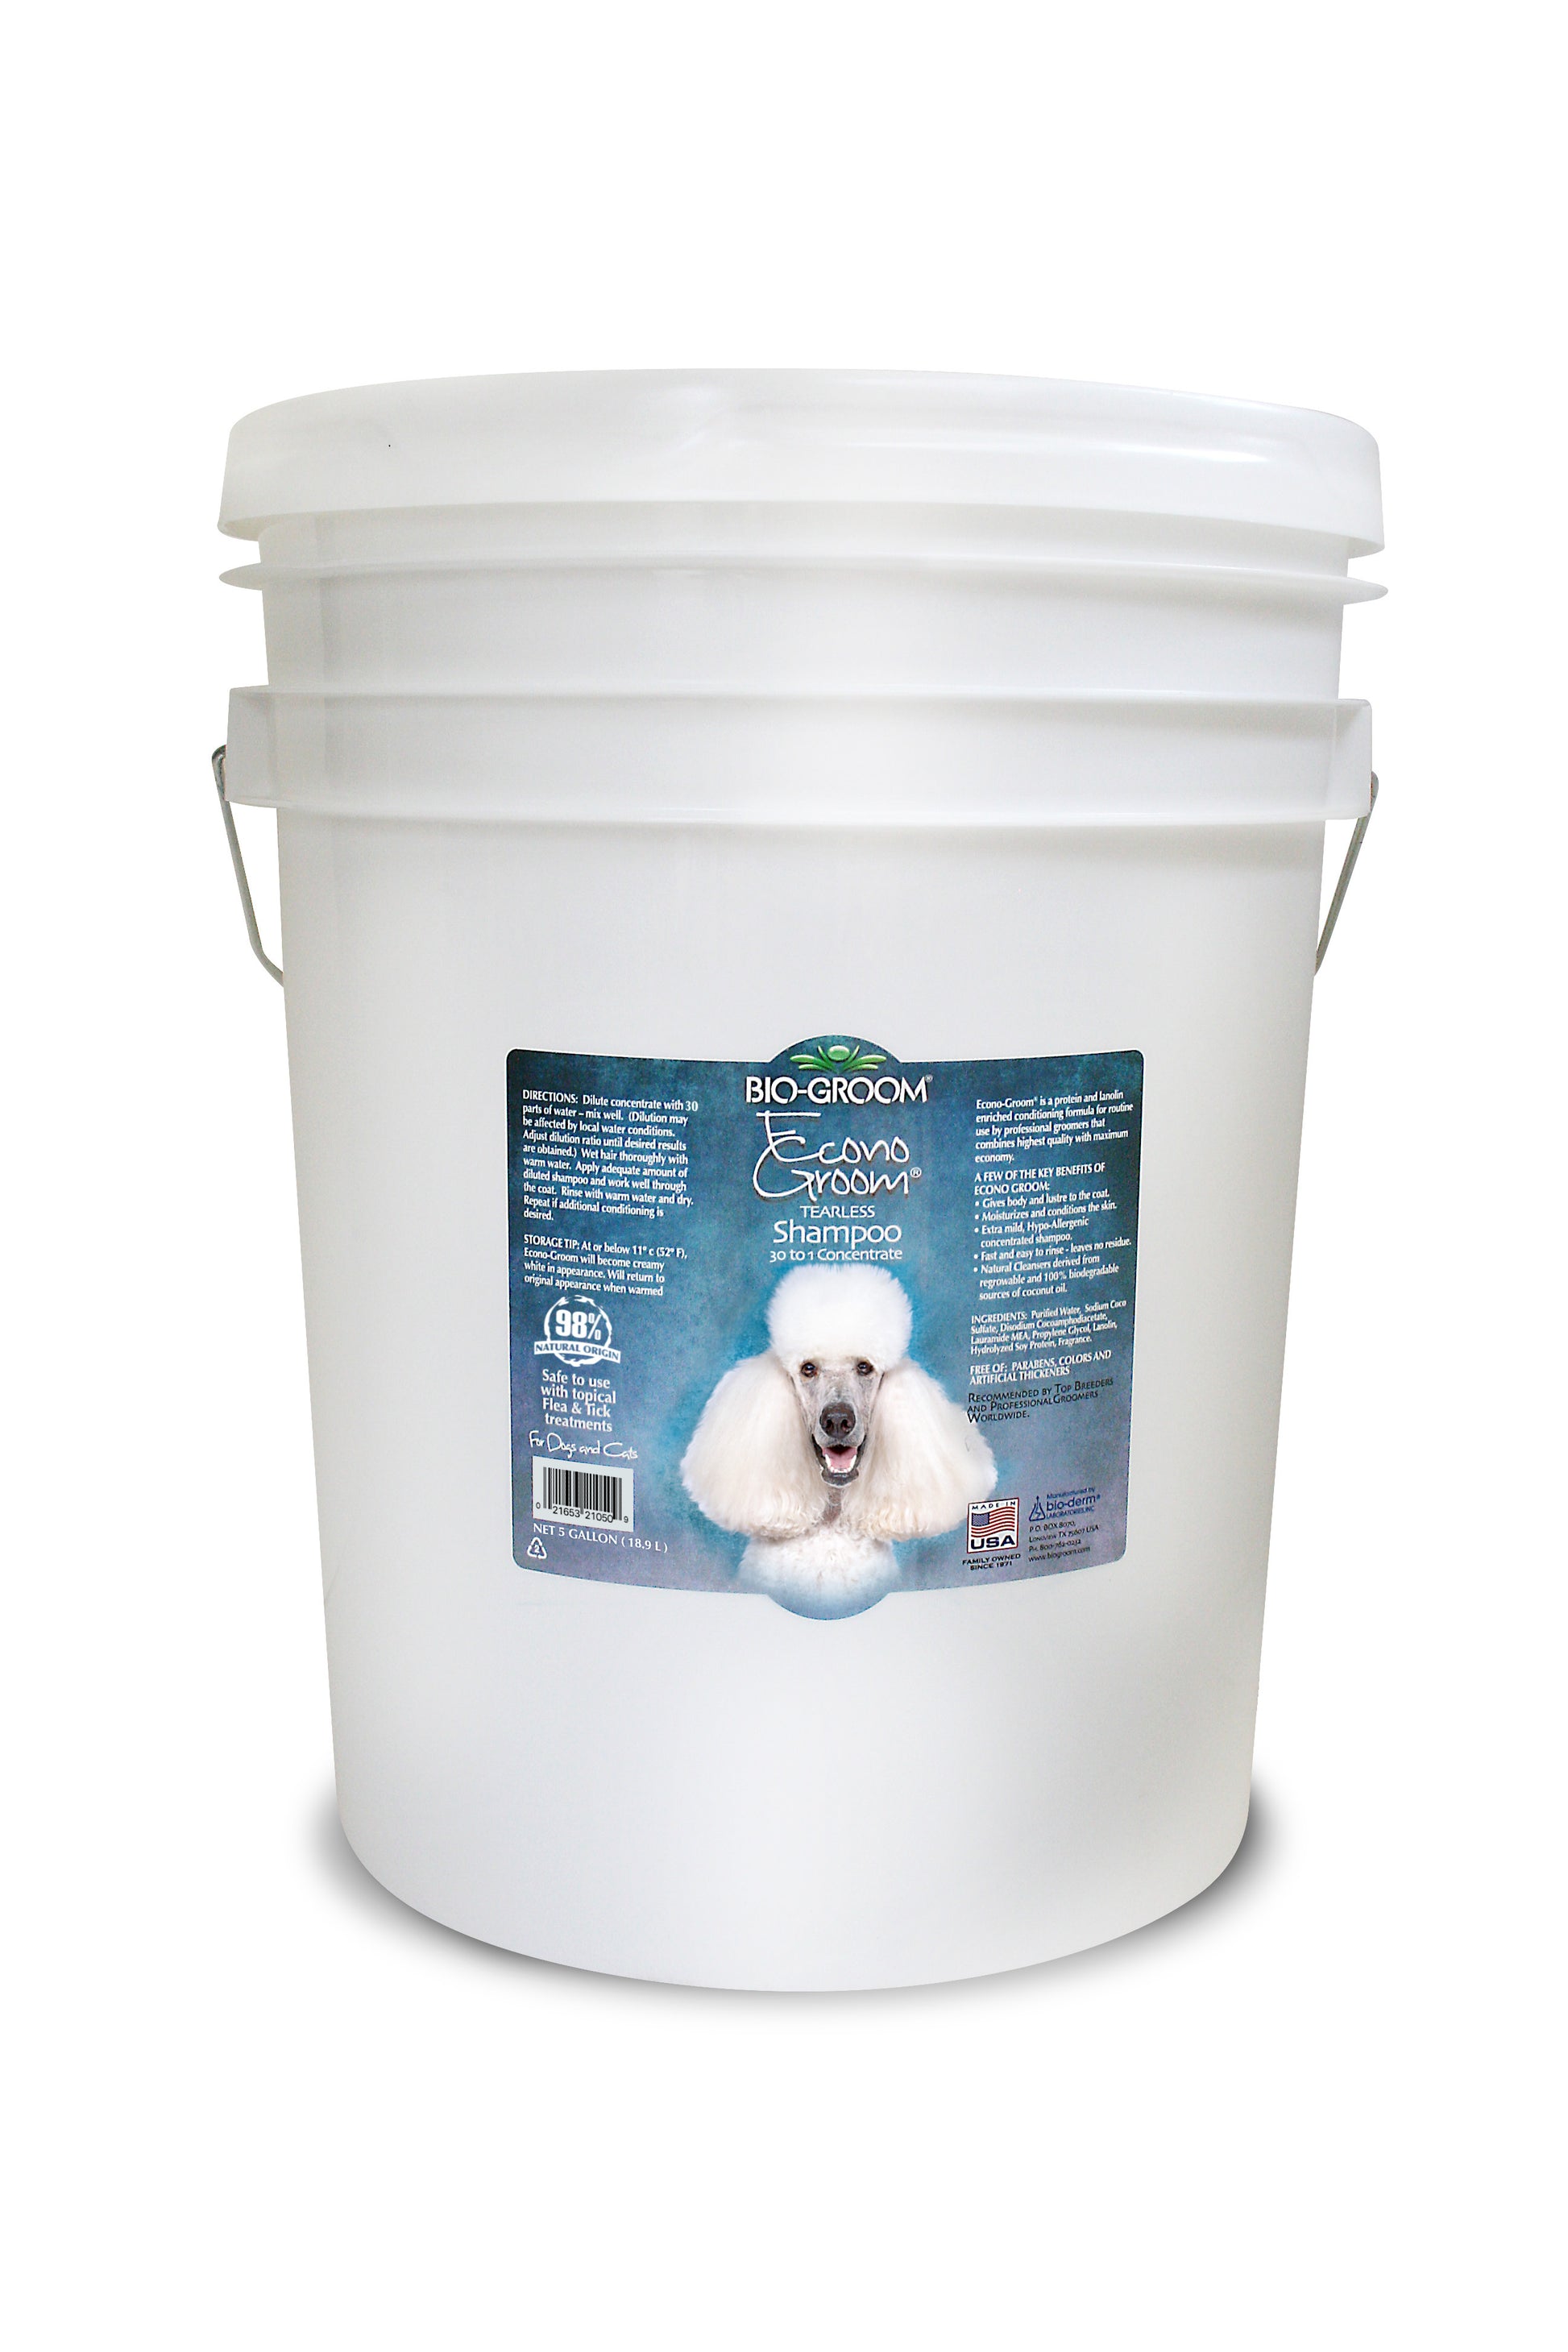 Bio-Groom Econo-Groom® concentrated shampoo is a hypoallergenic and tear-free formula. It's enriched with protein and lanolin for skin and coat hydration, while providing body and shine. Natural cleansers come from 100% biodegradable vegetable-based coconut oil. Free of Parabens, color dyes, and artificial thickeners. 5 gallons.